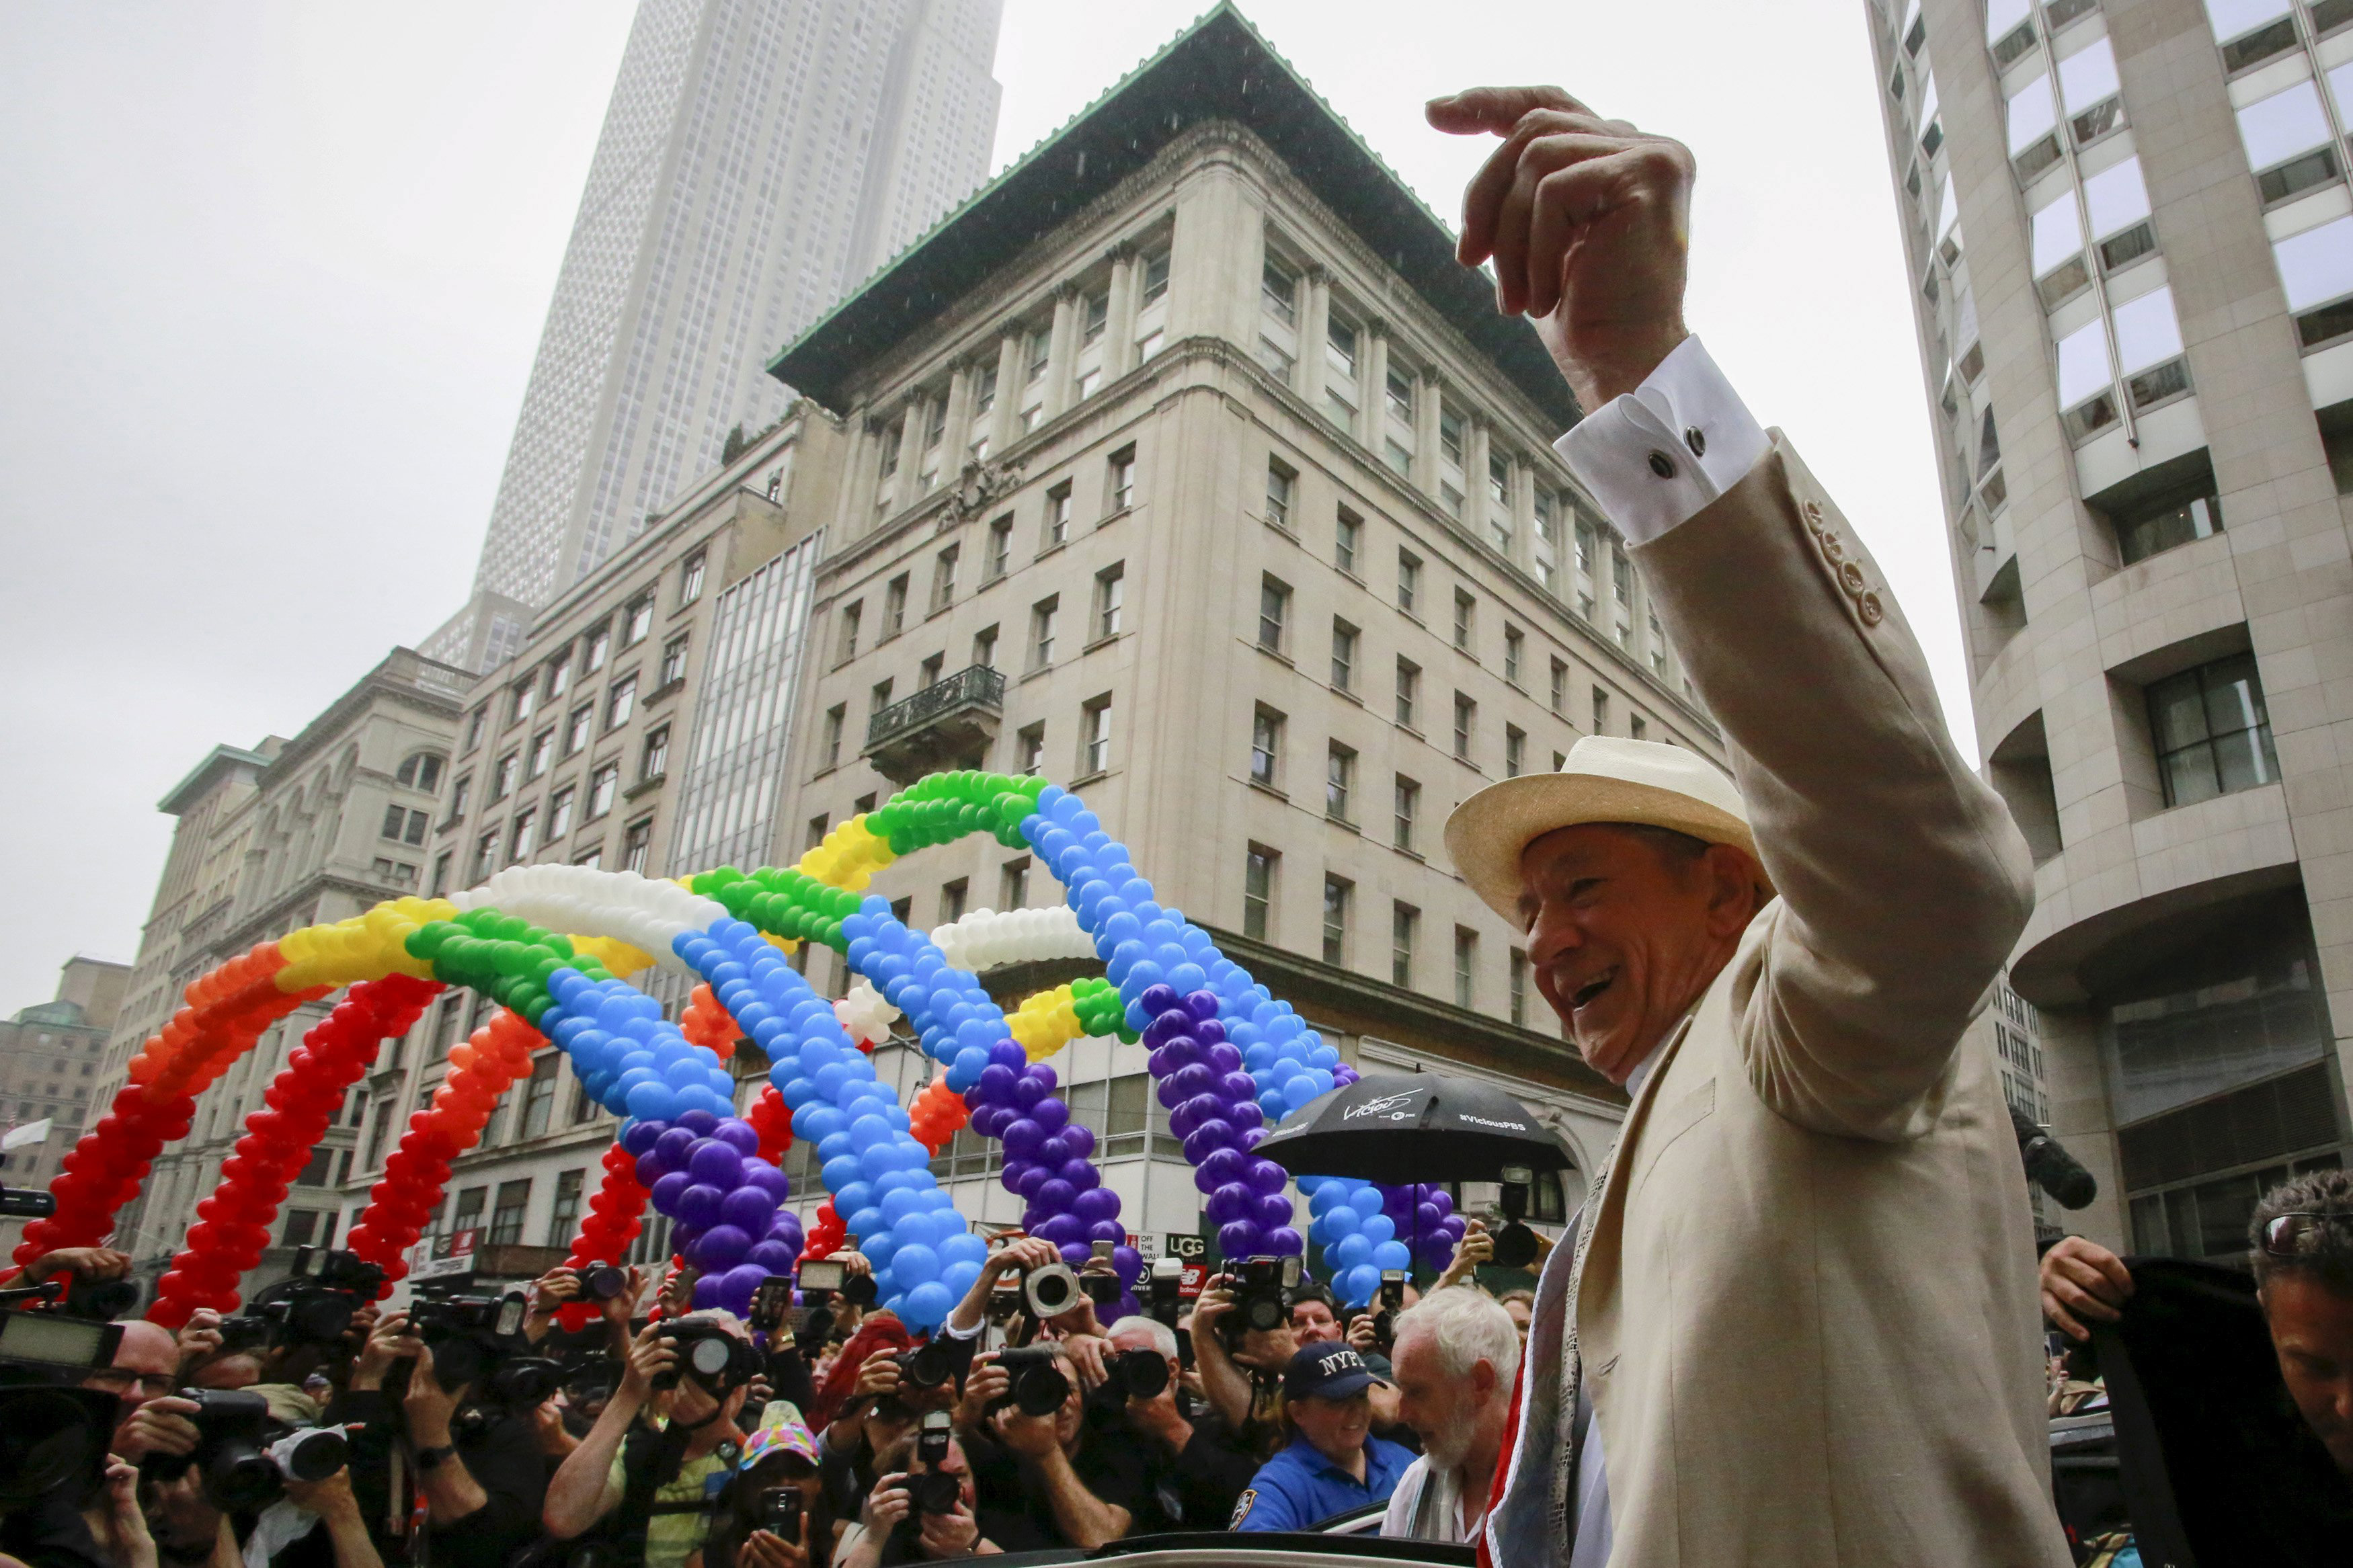 Actor Ian McKellen waves to the crowd as he attends as grand marshal during the annual Gay Pride parade in New York City on June 28, 2015.